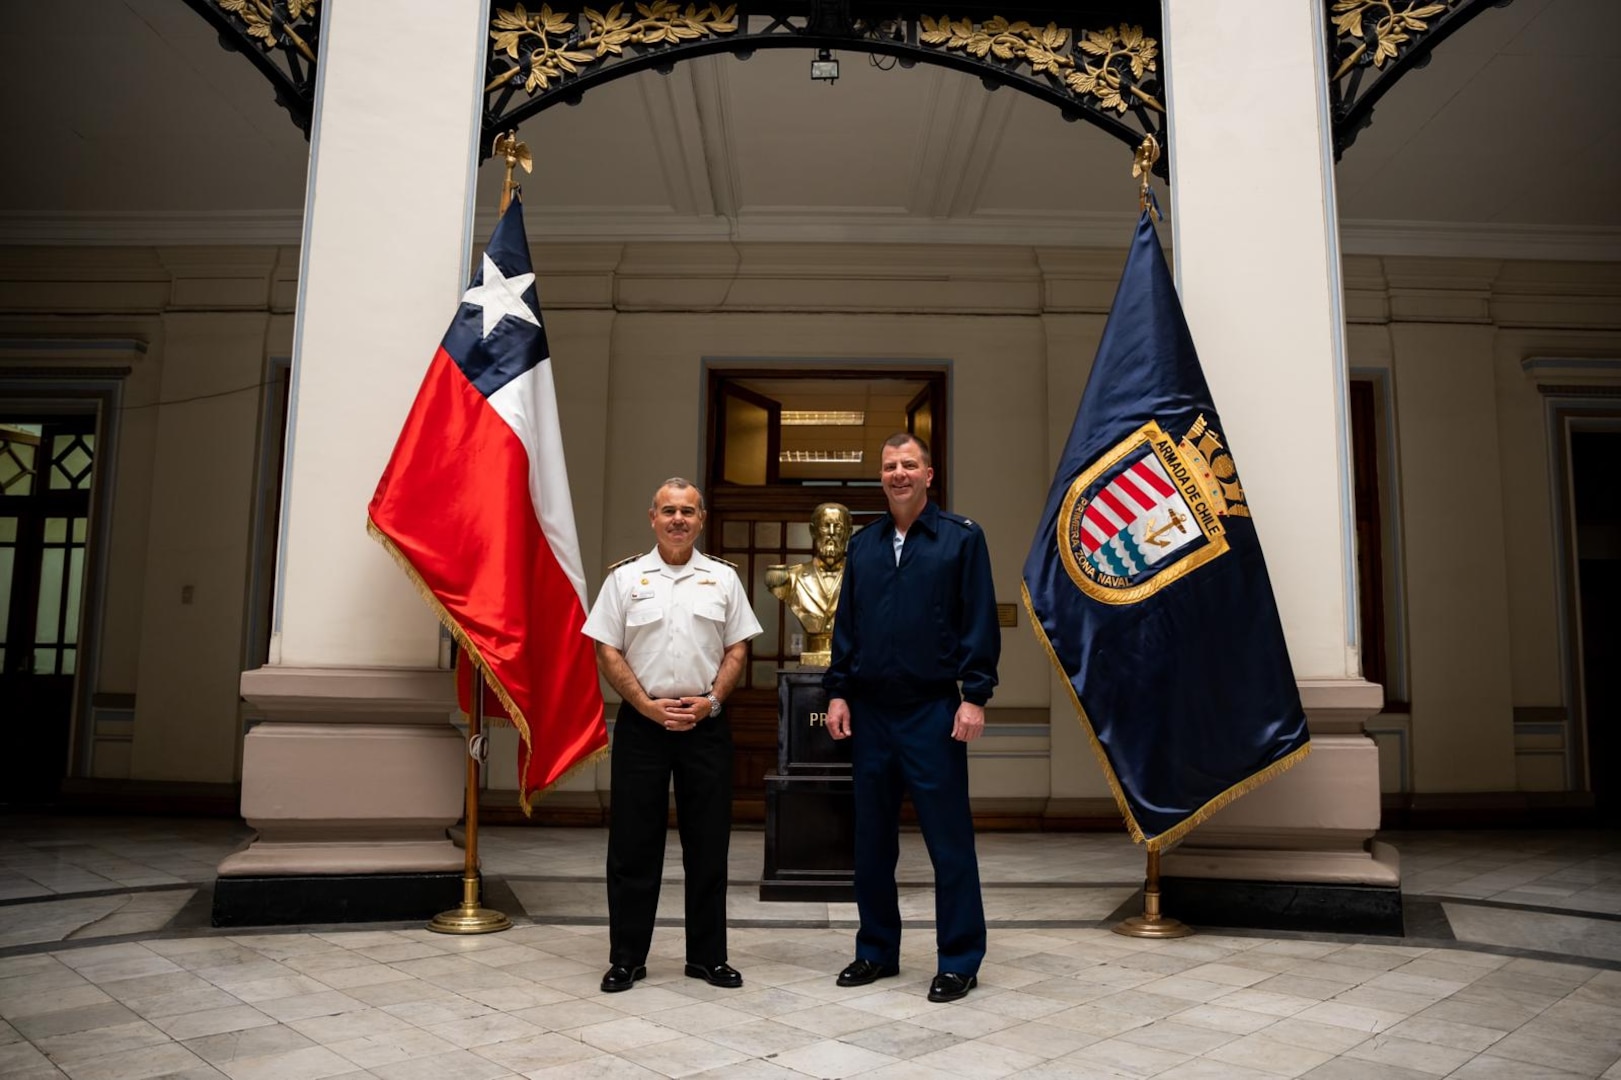 Chilean Navy Rear Adm. Juan Zúñiga, Commander of the First Naval Zone, and U.S. Coast Guard Capt. Keith Ropella, commanding officer of Coast Guard Cutter Polar Star (WAGB 10) pose for a photo in the Headquarters of the First Naval Zone, Valparaíso, Chile, March 20, 2023. Chile has been a reliable partner in supporting the annual Operation Deep Freeze mission, which is emblematic of the deep and enduring military and scientific collaboration between the U.S. and Chile. (U.S. Coast Guard photo by Petty Officer 3rd Class Aidan Cooney)